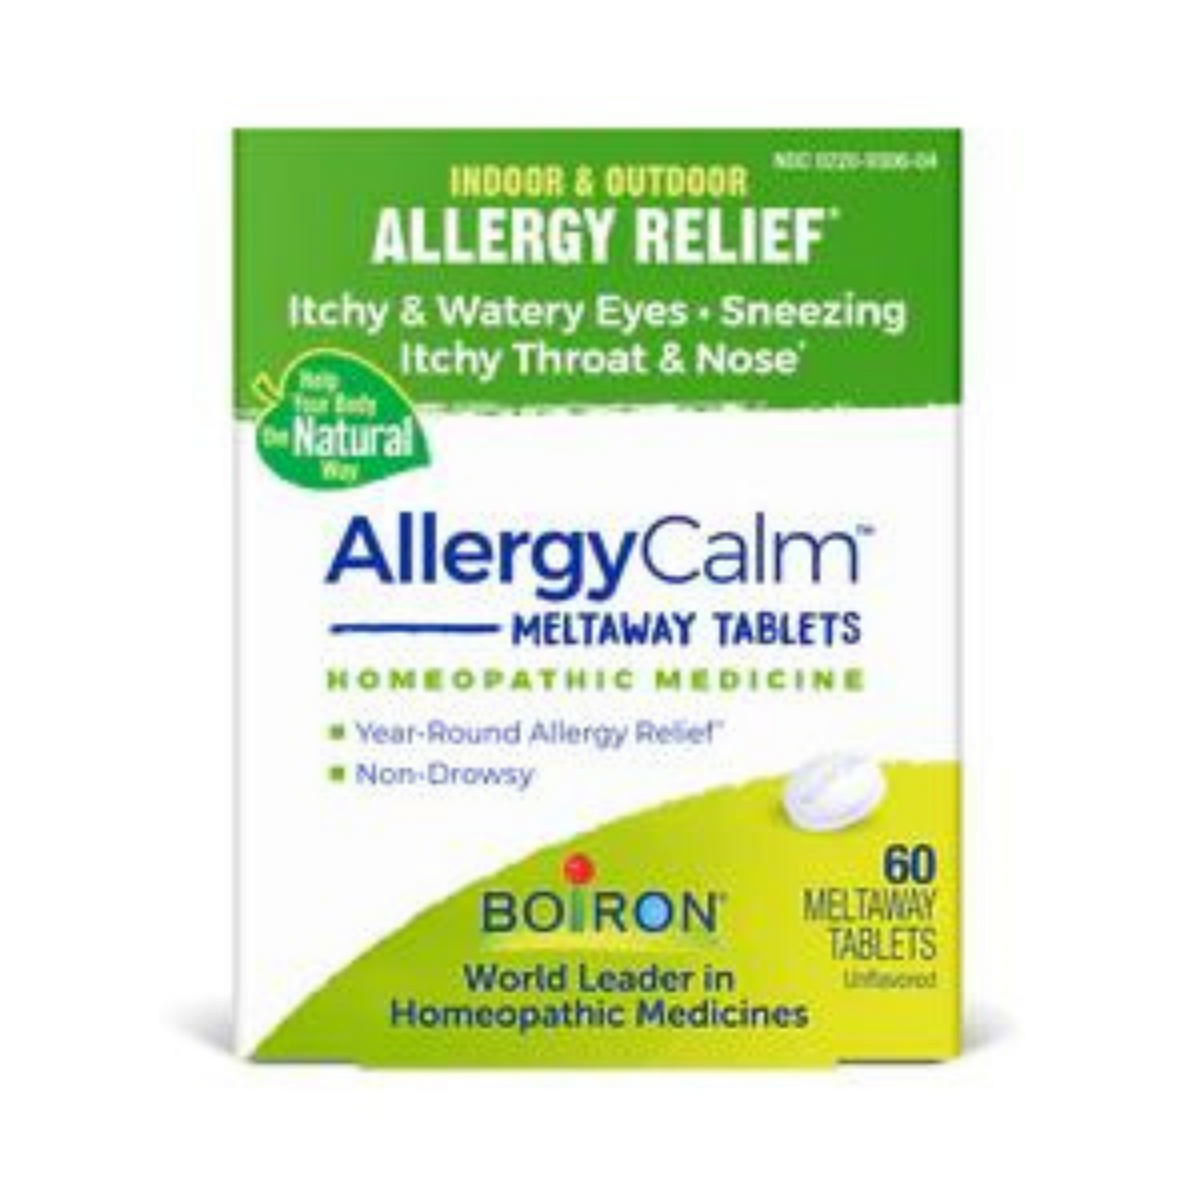 Primary Image of Boiron AllergyCalm (60 count)